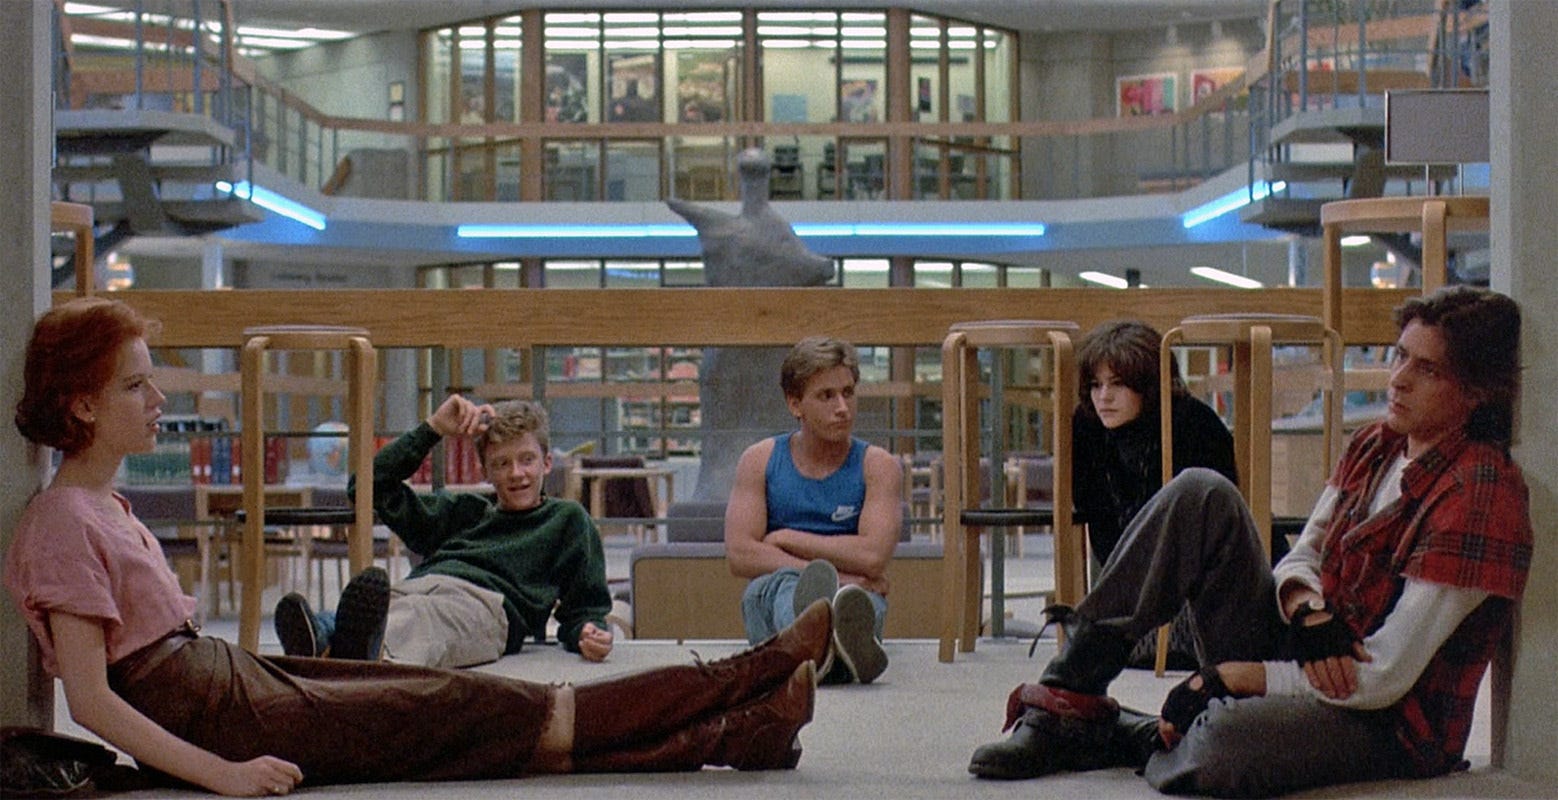 ‘The Breakfast Club’ is set at a Saturday detention